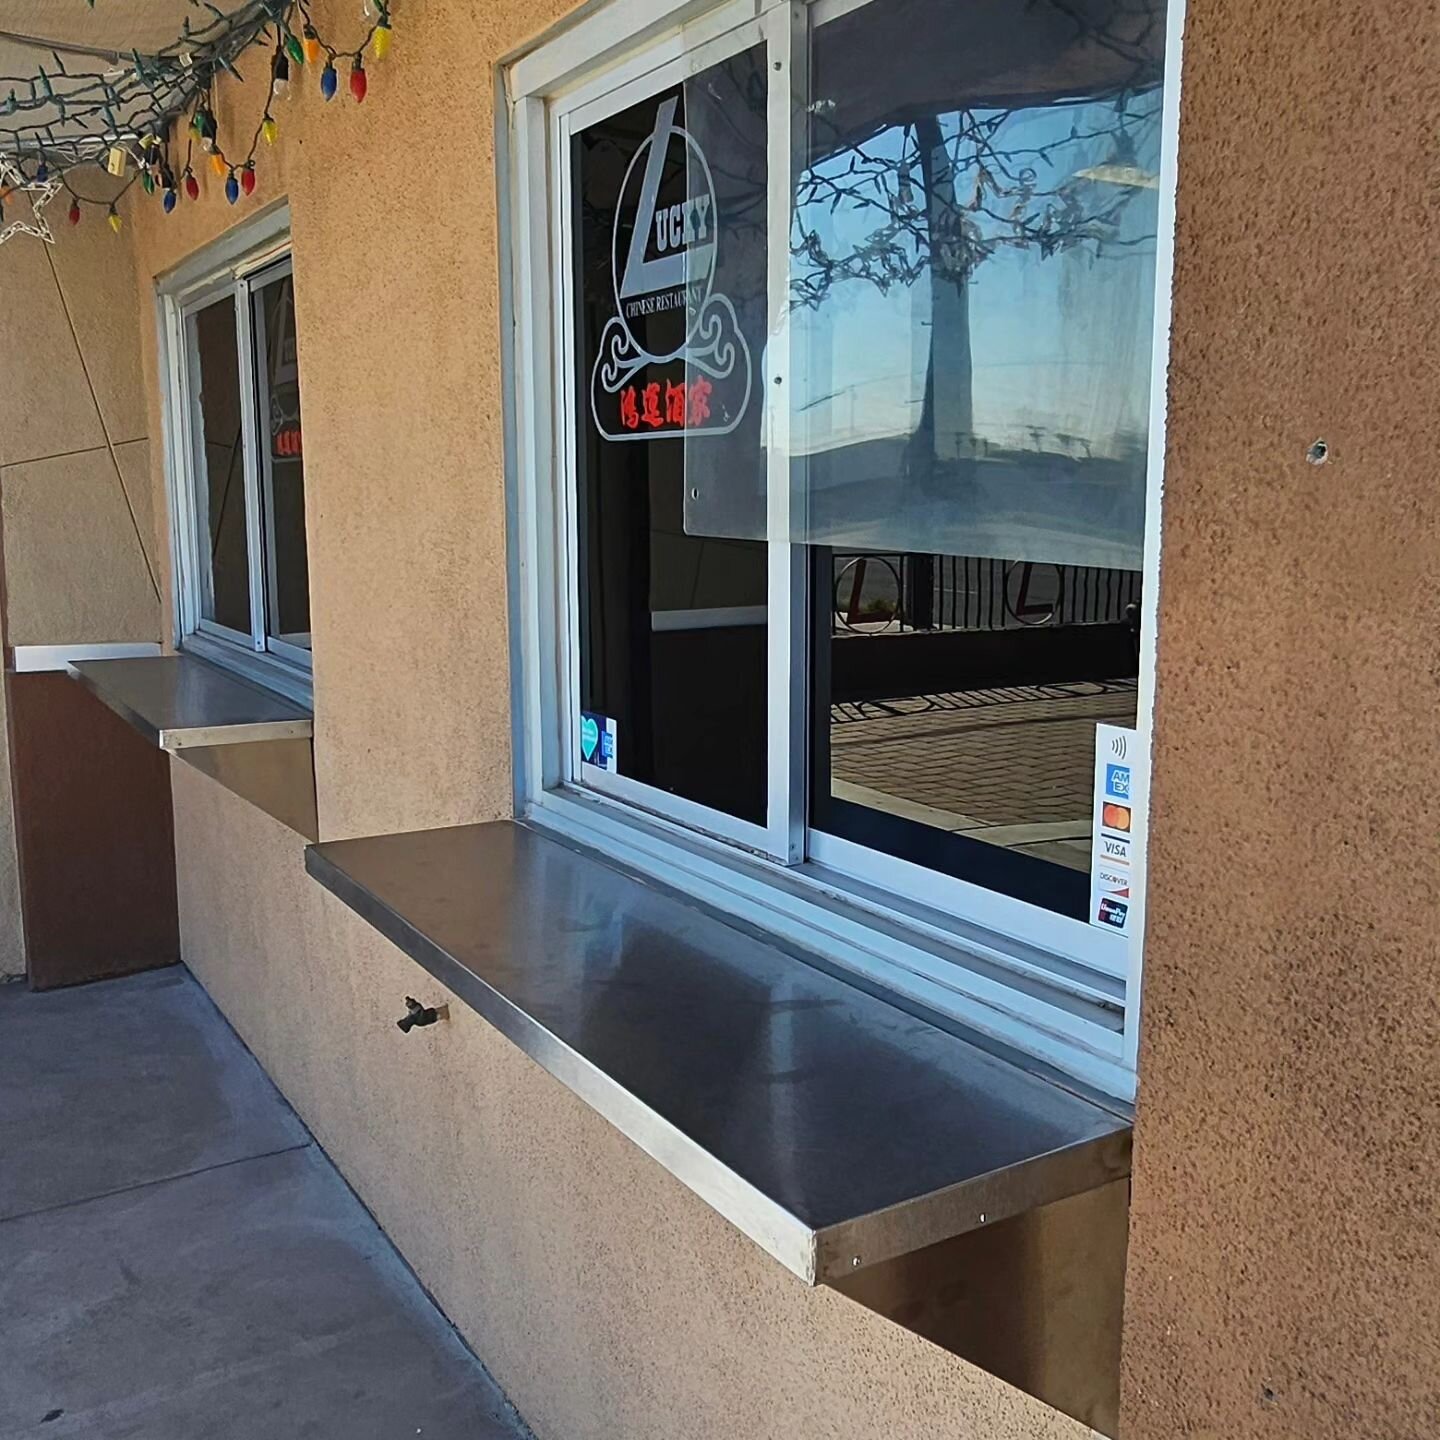 New shelves for the takeout windows!!

#luckychineserestaurant #localbusiness #elcentroca